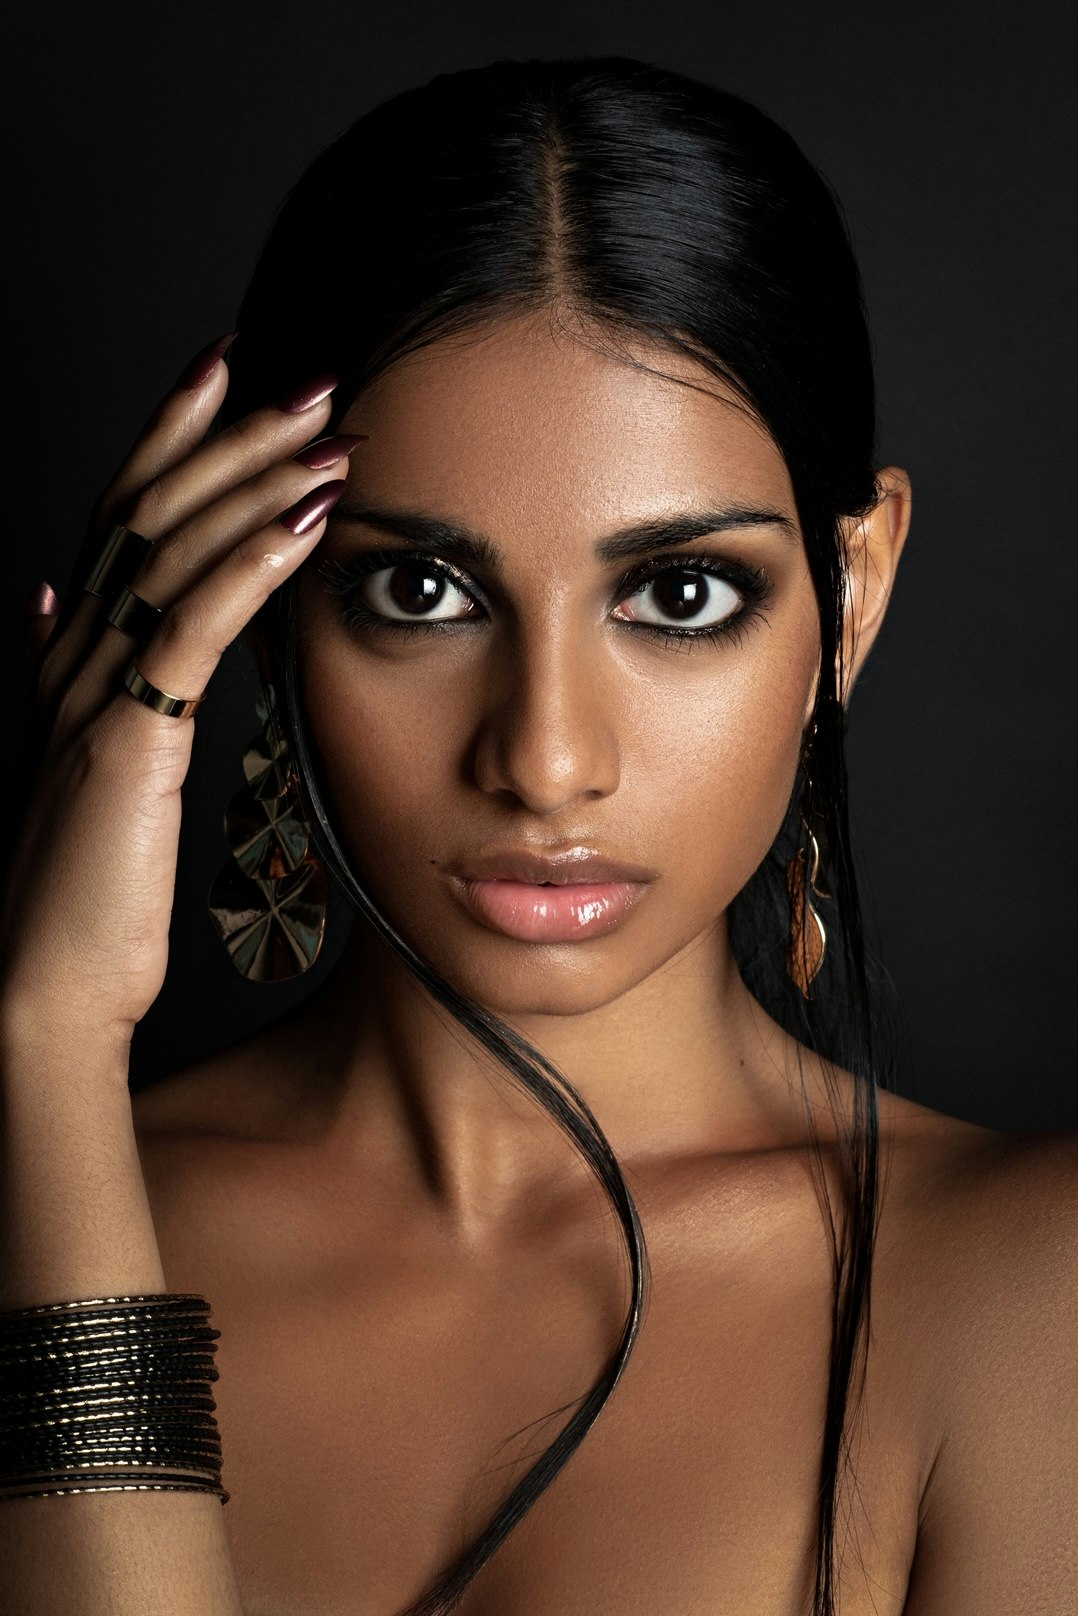 An image of Payal Mistry